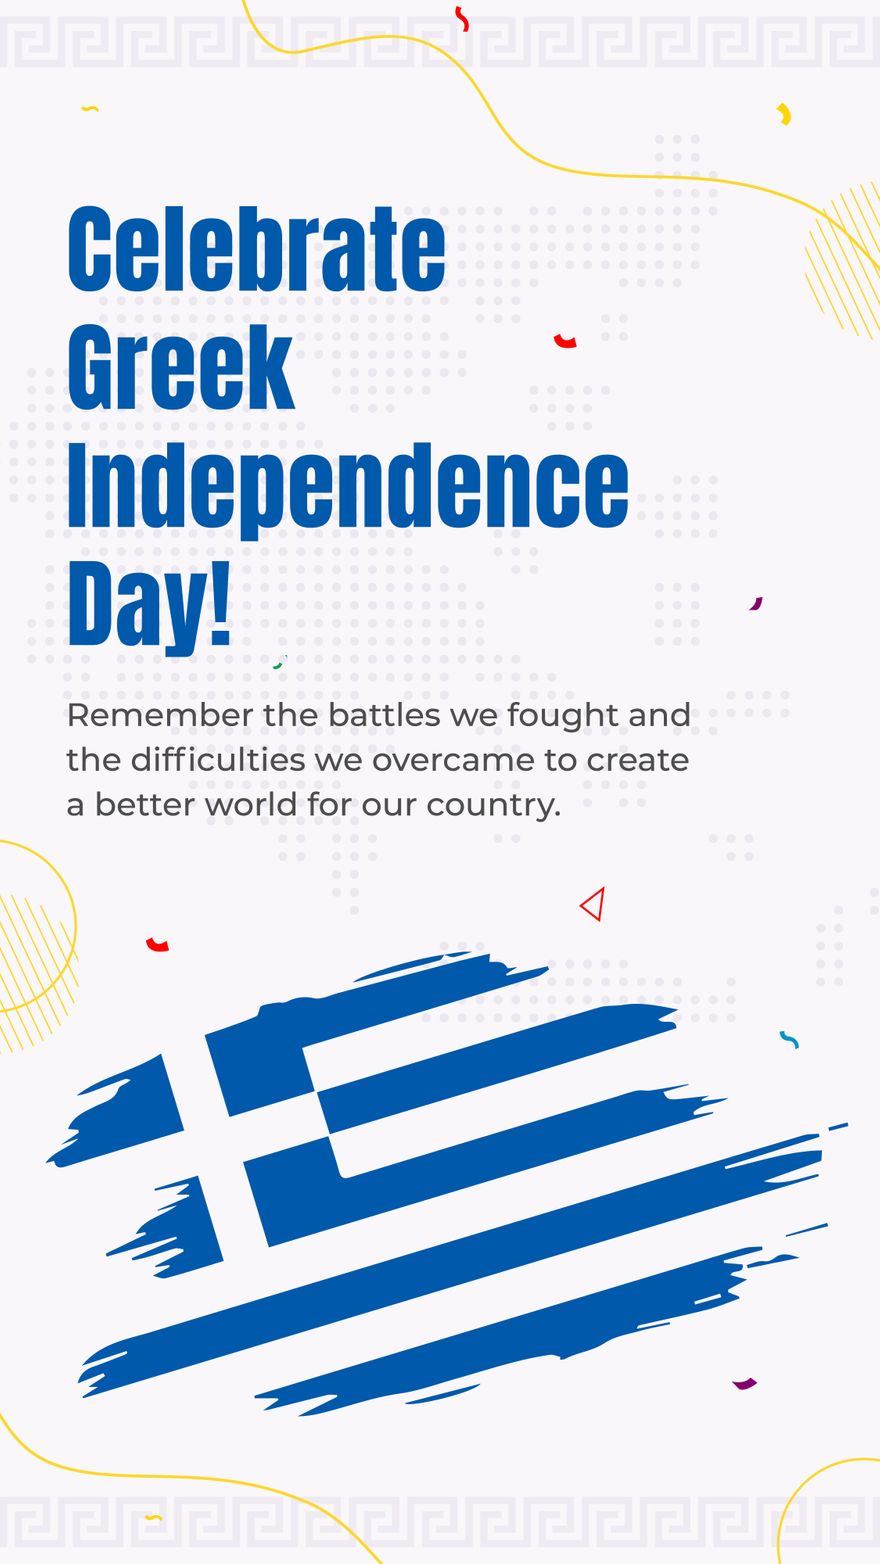 Free Greek Independence Day Whatsapp Status in Illustrator, PSD, EPS, SVG, JPG, PNG